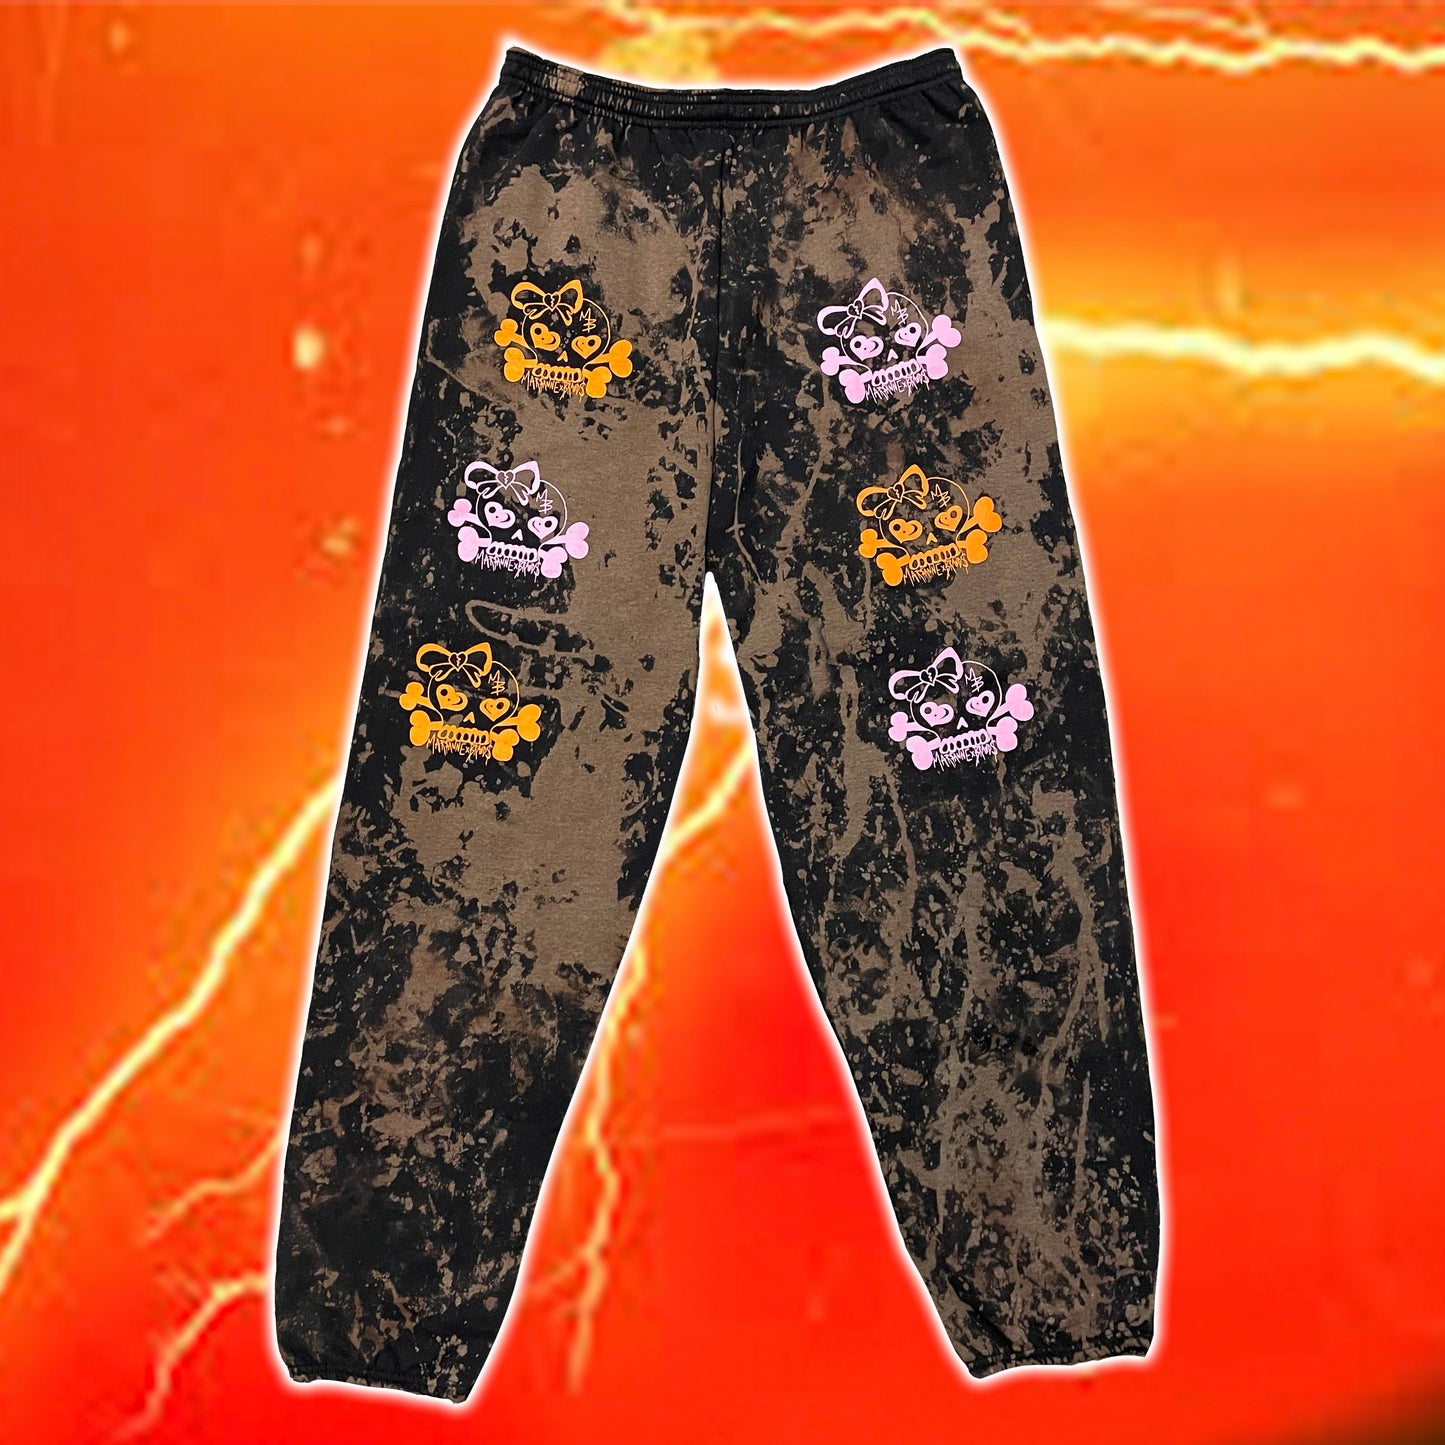 REWORKED CANDY SKULL SWEATPANTS